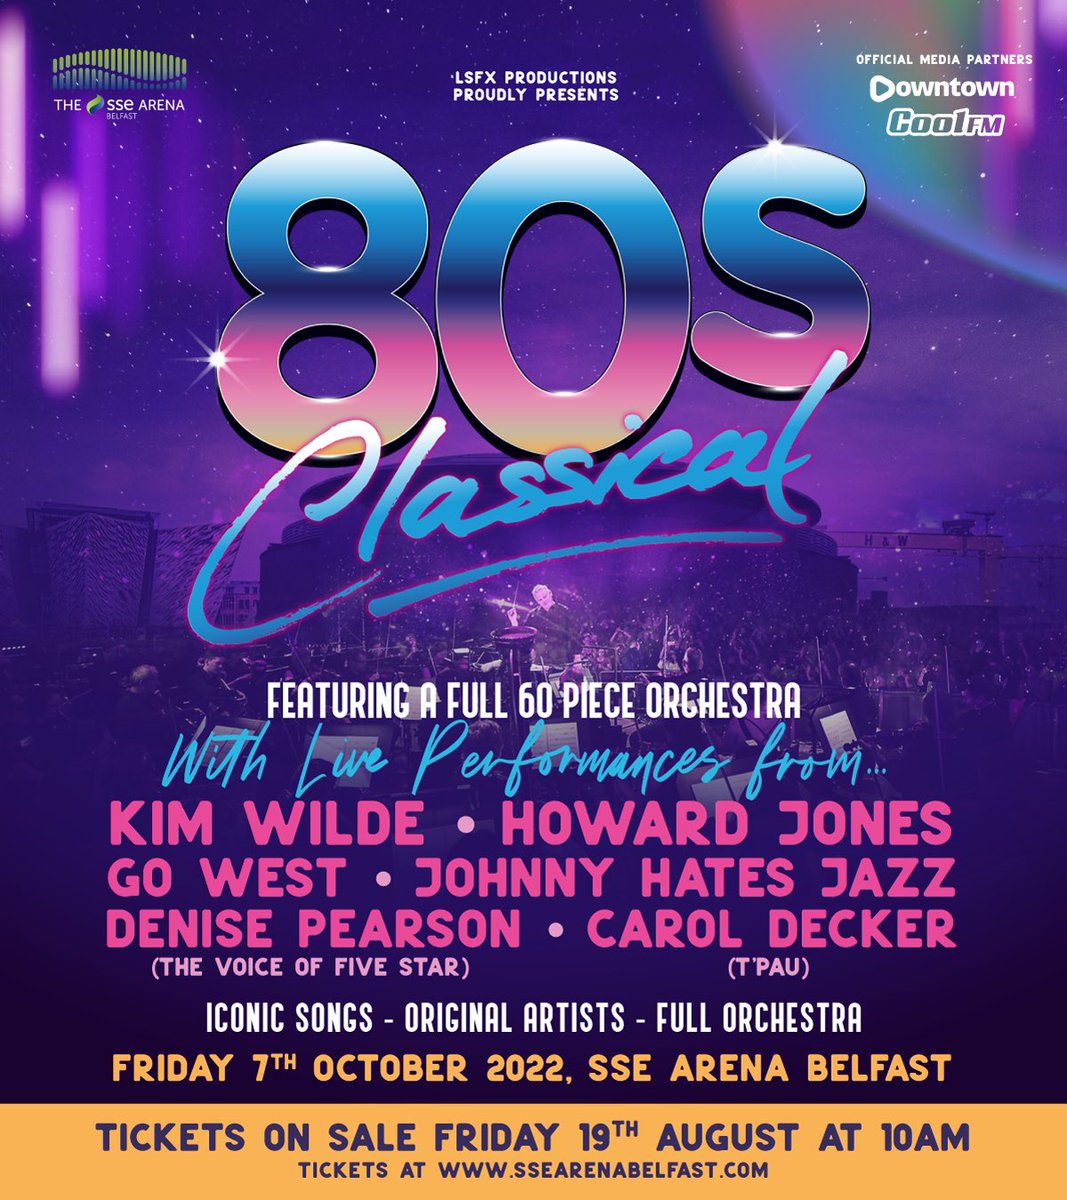 80s Classical is coming to the SSE Arena, Belfast on Friday 7th October 2022! JHJ, Kim Wilde, Howard Jones, Carol Decker (T’Pau), Go West & Denise Pearson (Five Star) + a 60 piece orchestra! Tickets: Friday 19th August at 10am via ssearenabelfast.com @80sClassical #80smusic